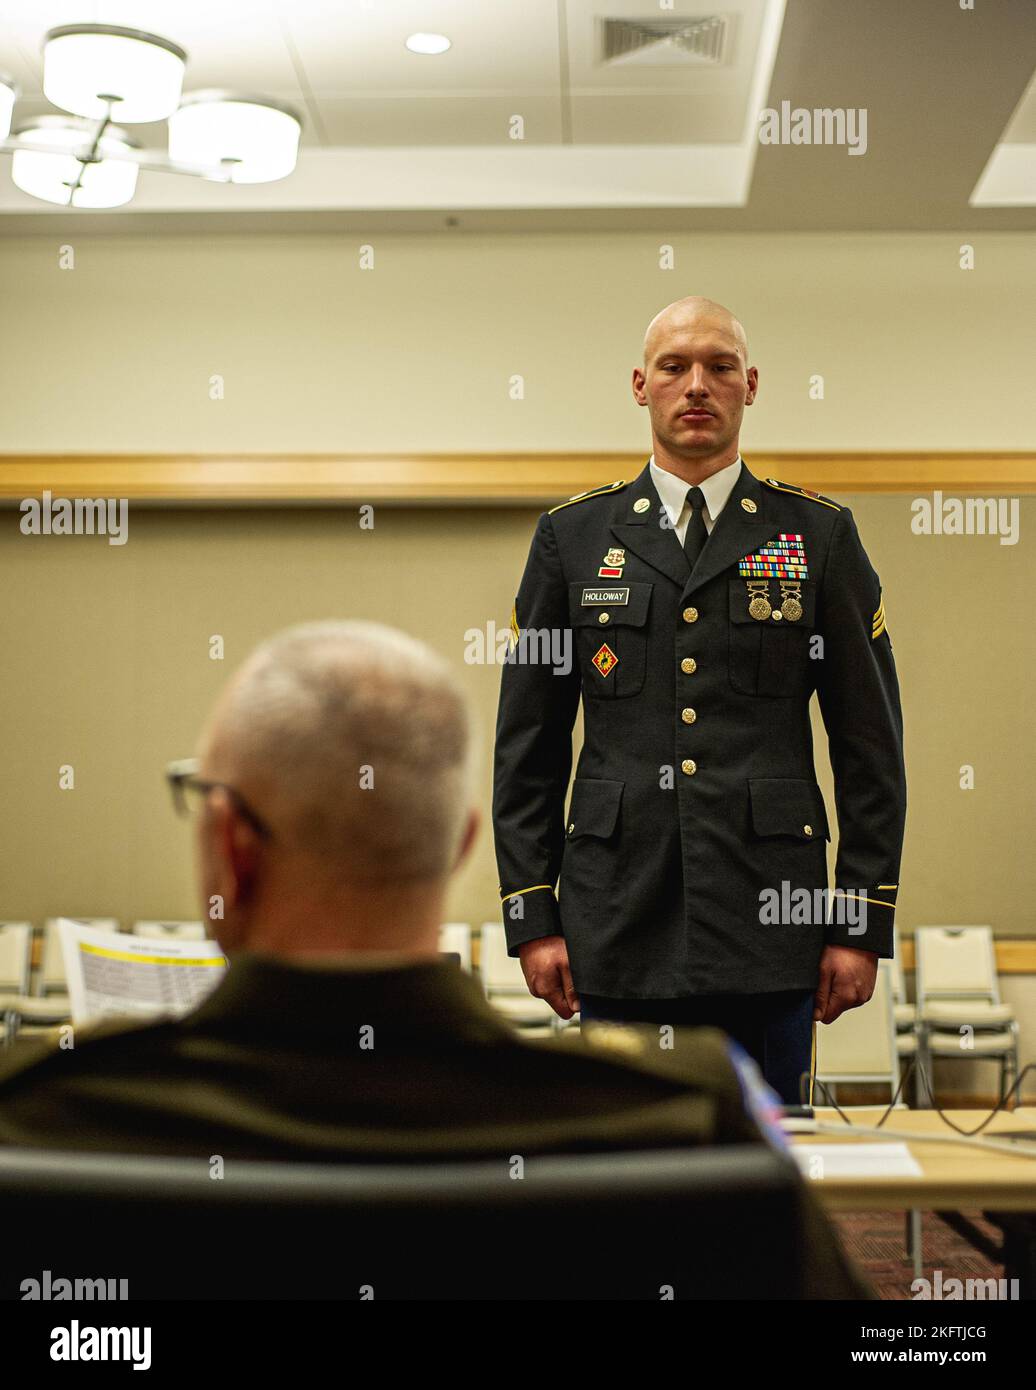 U.S. Army Sgt. Tyler Holloway, with the U.S. Army National Guard, is inspected by Cmd. Sgt. Maj. Brian A. Hester, the Cmd. Sgt. Maj. of the Army Futures Command, while competing in the 2022 Best Squad Competition at the Pentagon Library and Conference Center in Arlington, Virginia, Oct. 7, 2022. The competition tests the squad’s proficiency in their warrior tasks and battle drills and identifies the most cohesive, highly trained, disciplined and fit team – ready to fight and win – while demonstrating commitment to the Army Values and Warrior Ethos. Stock Photo